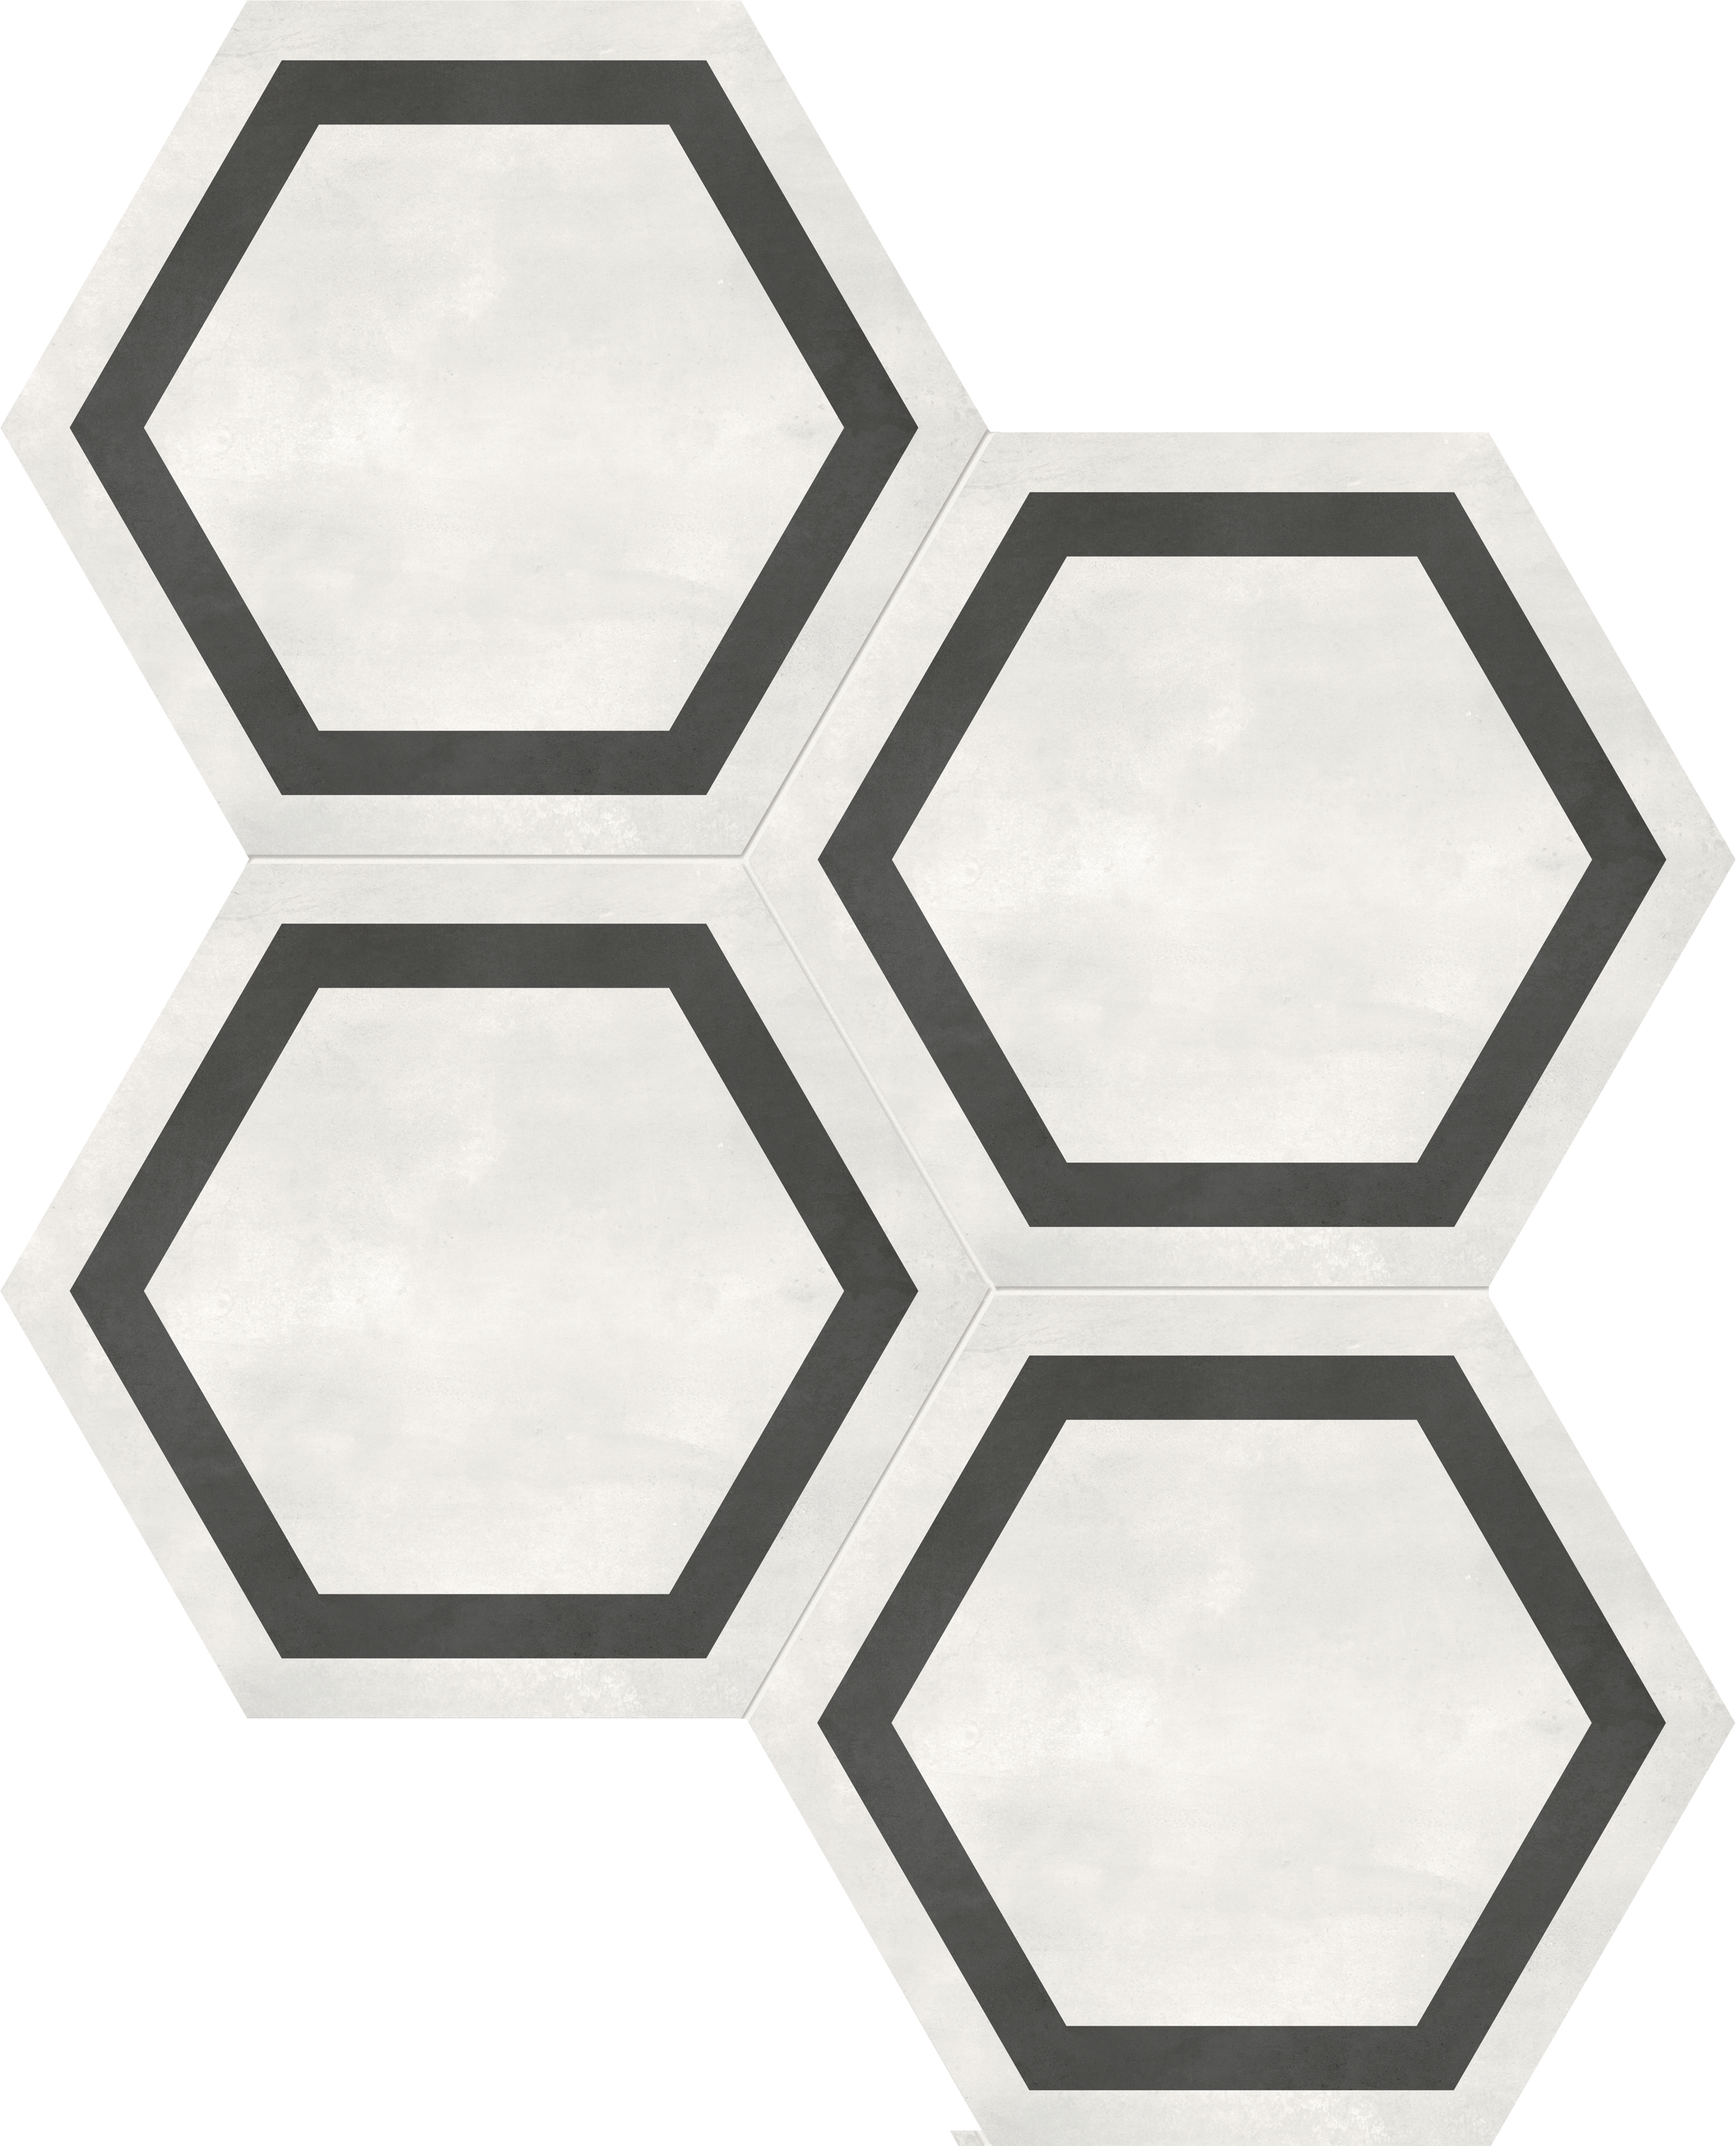 ivory print pattern glazed porcelain deco tile from form anatolia collection distributed by surface group international matte finish pressed edge 7-inch hexagon shape